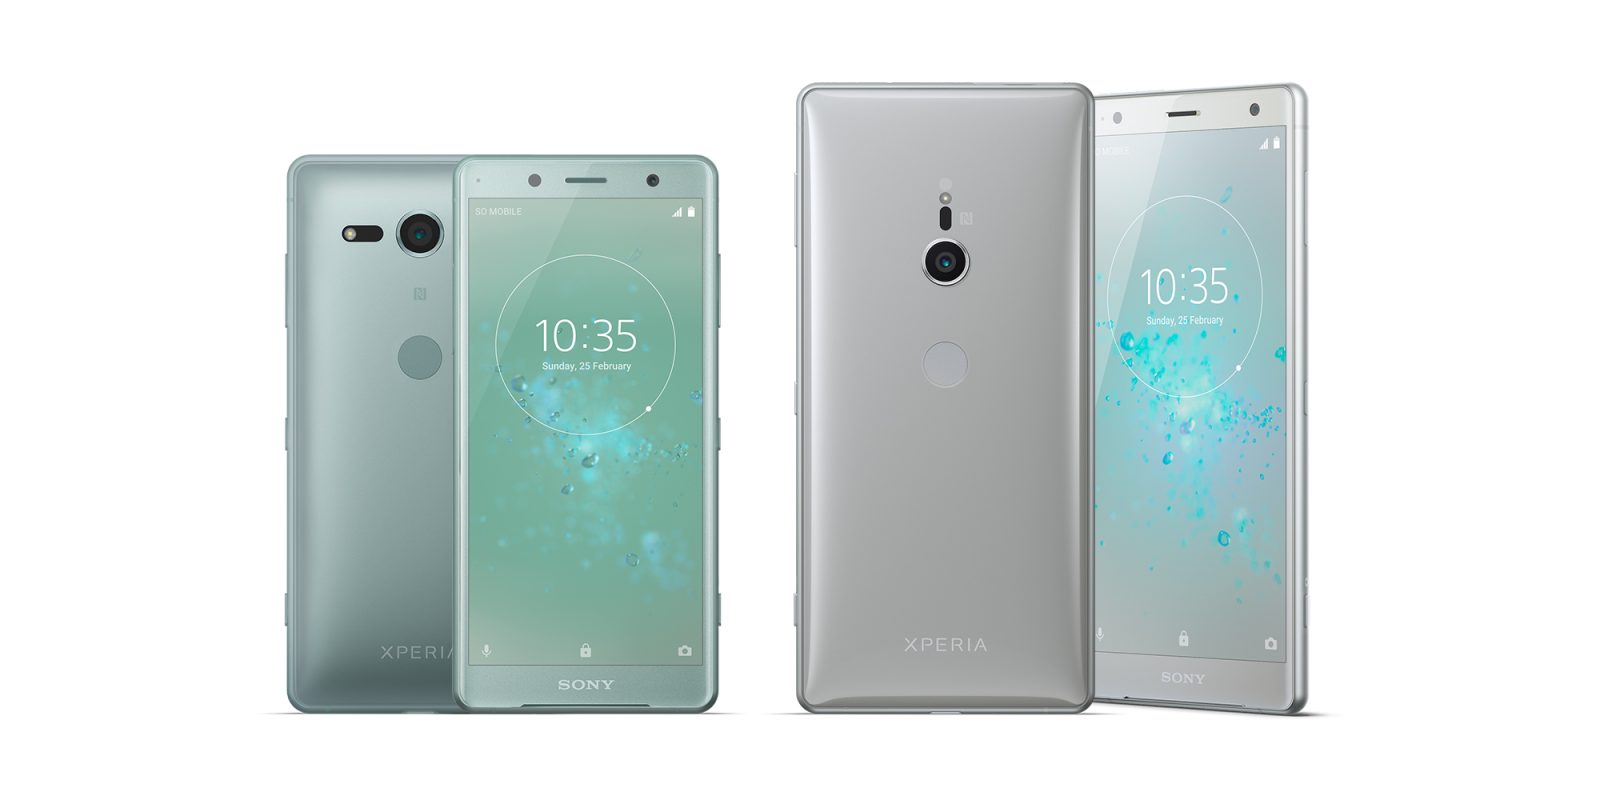 Sony Xperia XZ2 and Xperia XZ2 Compact Launched